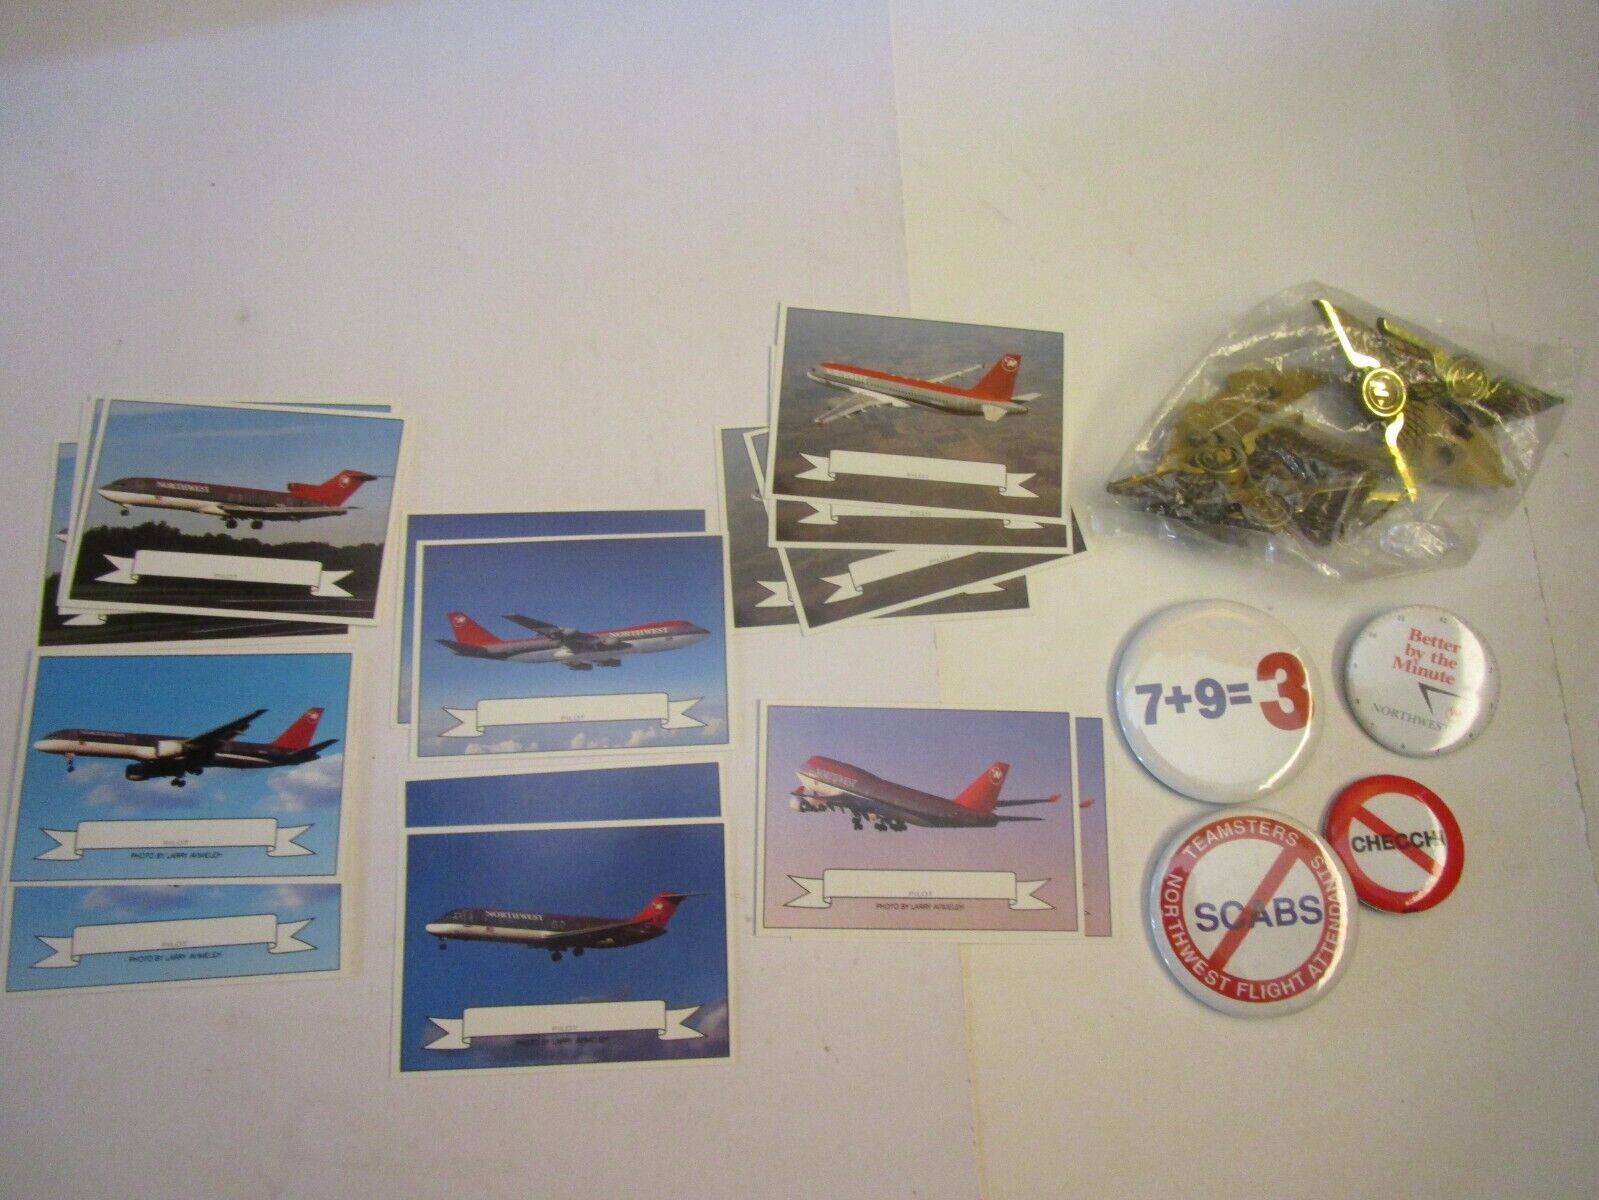 HUGE Lot  # 5 Northwest Airlines Items -10 CARDS   4 Pins,  10 WINGS 